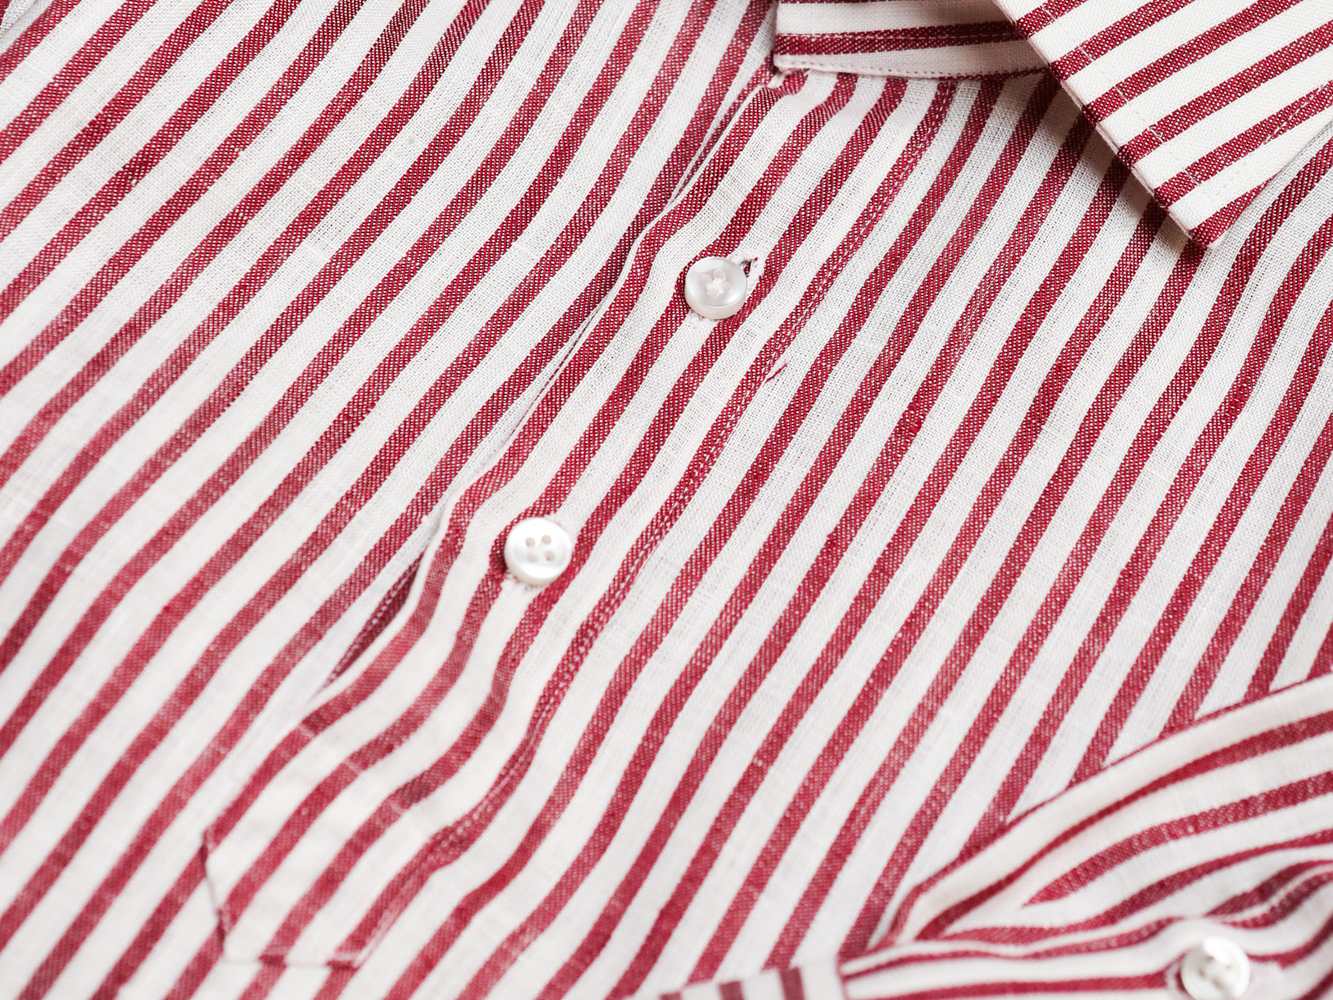 Popover cannon on white and red striped shirt